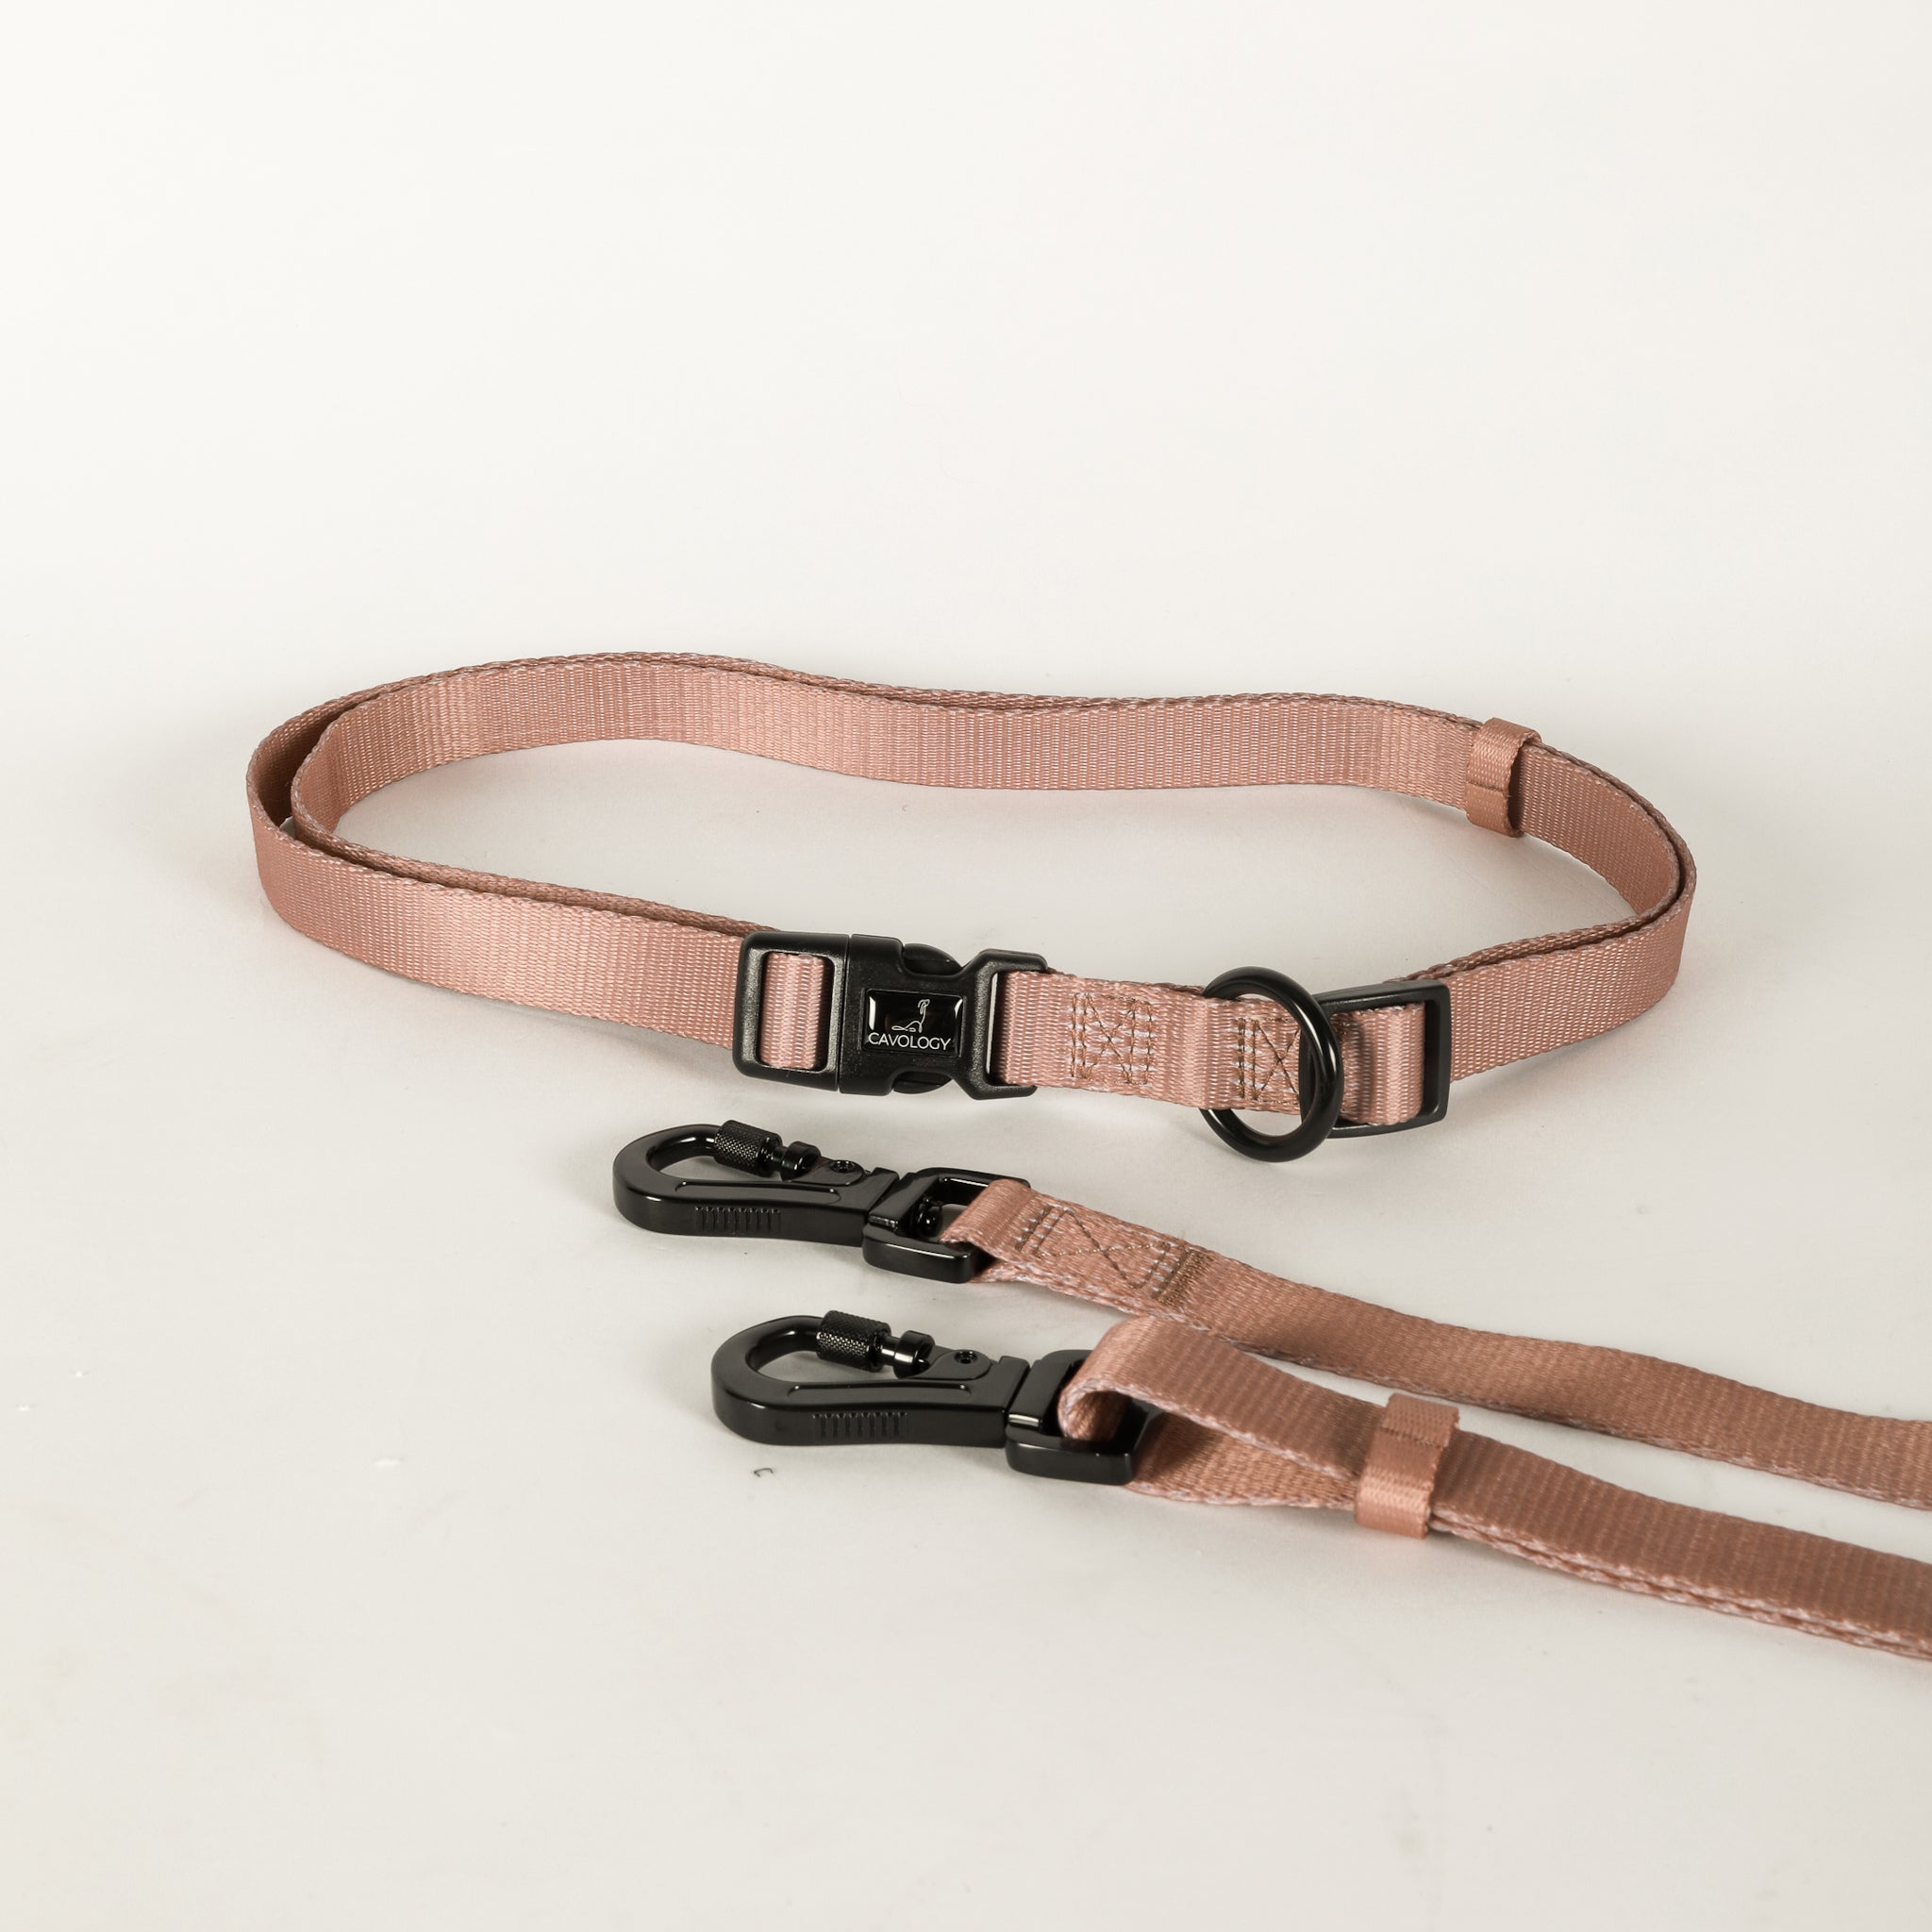 LEASH ATTACHMENT FOR HANDS FREE LEASH NUDE